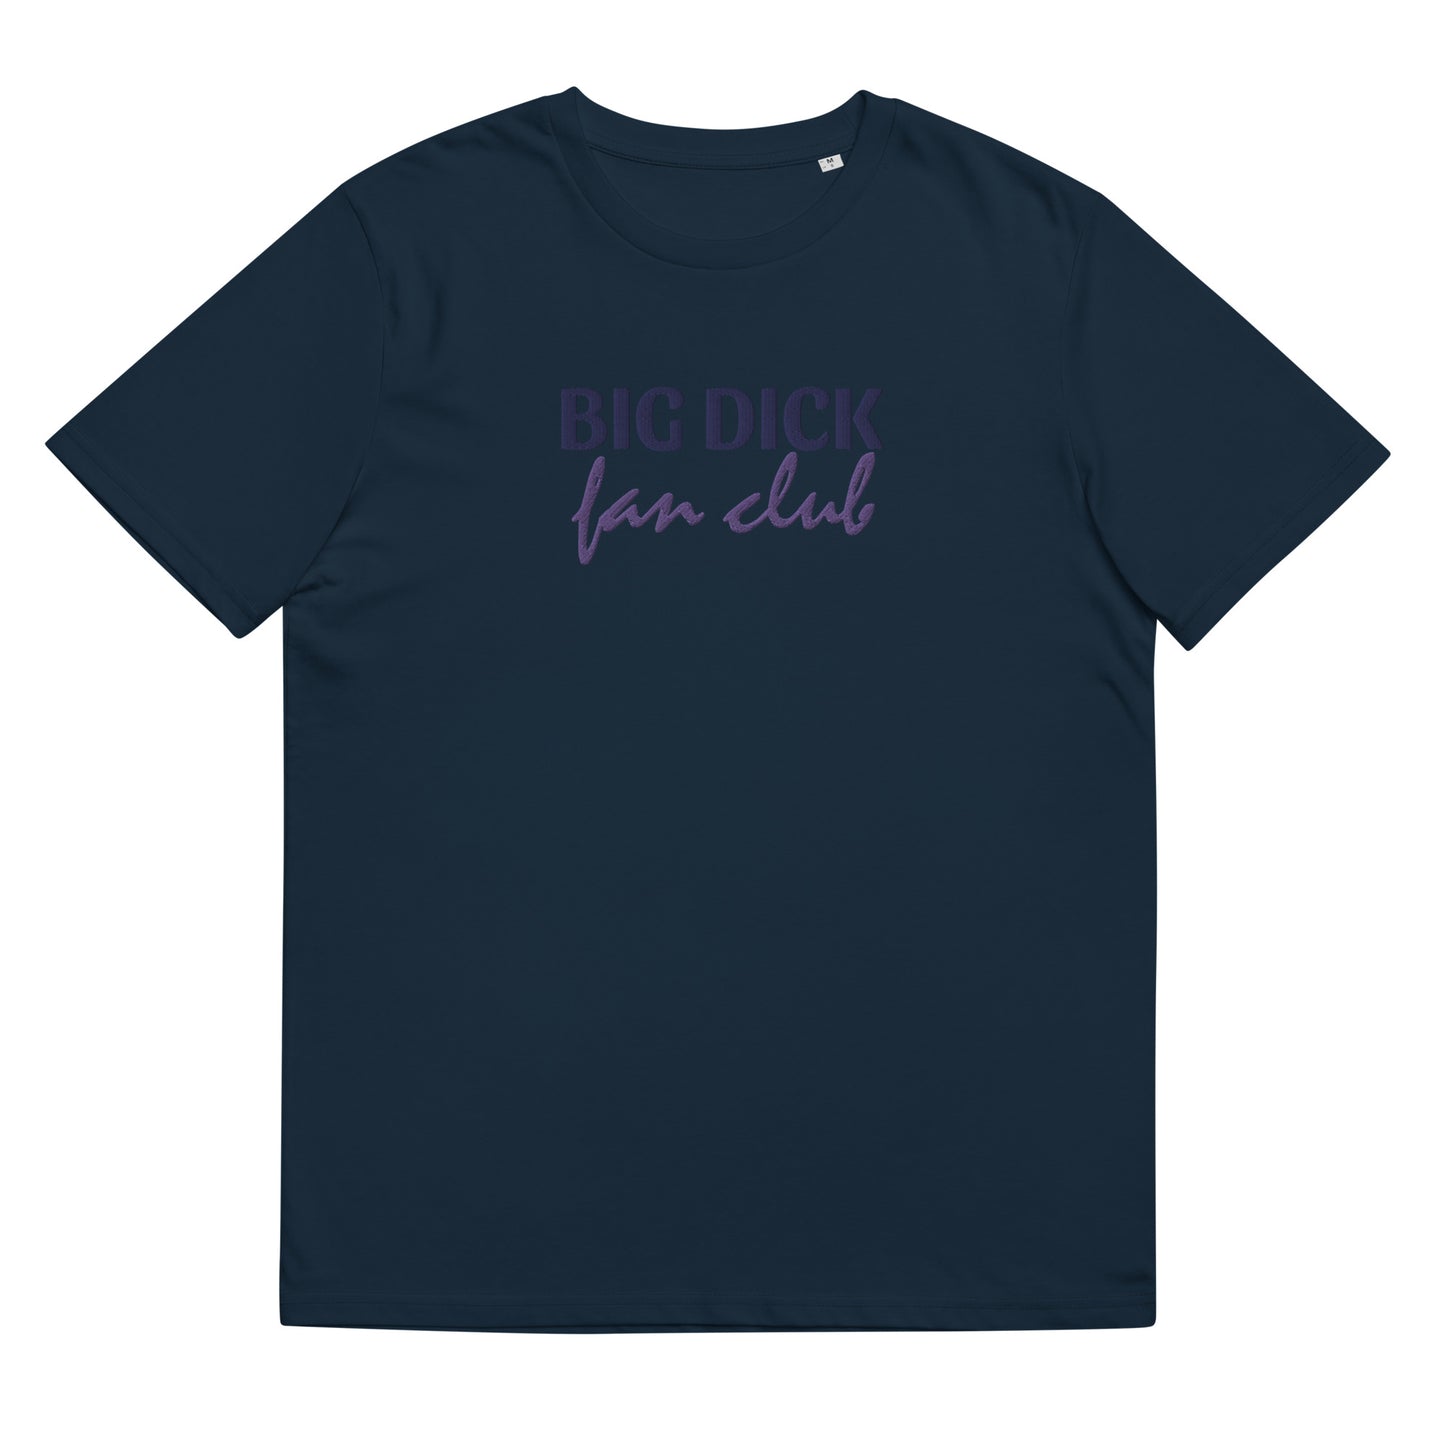 Fitted French navy blue organic cotton t-shirt with an embroidered gay joke: "big d fan club" on the center chest. Available in sizes S to 3XL.